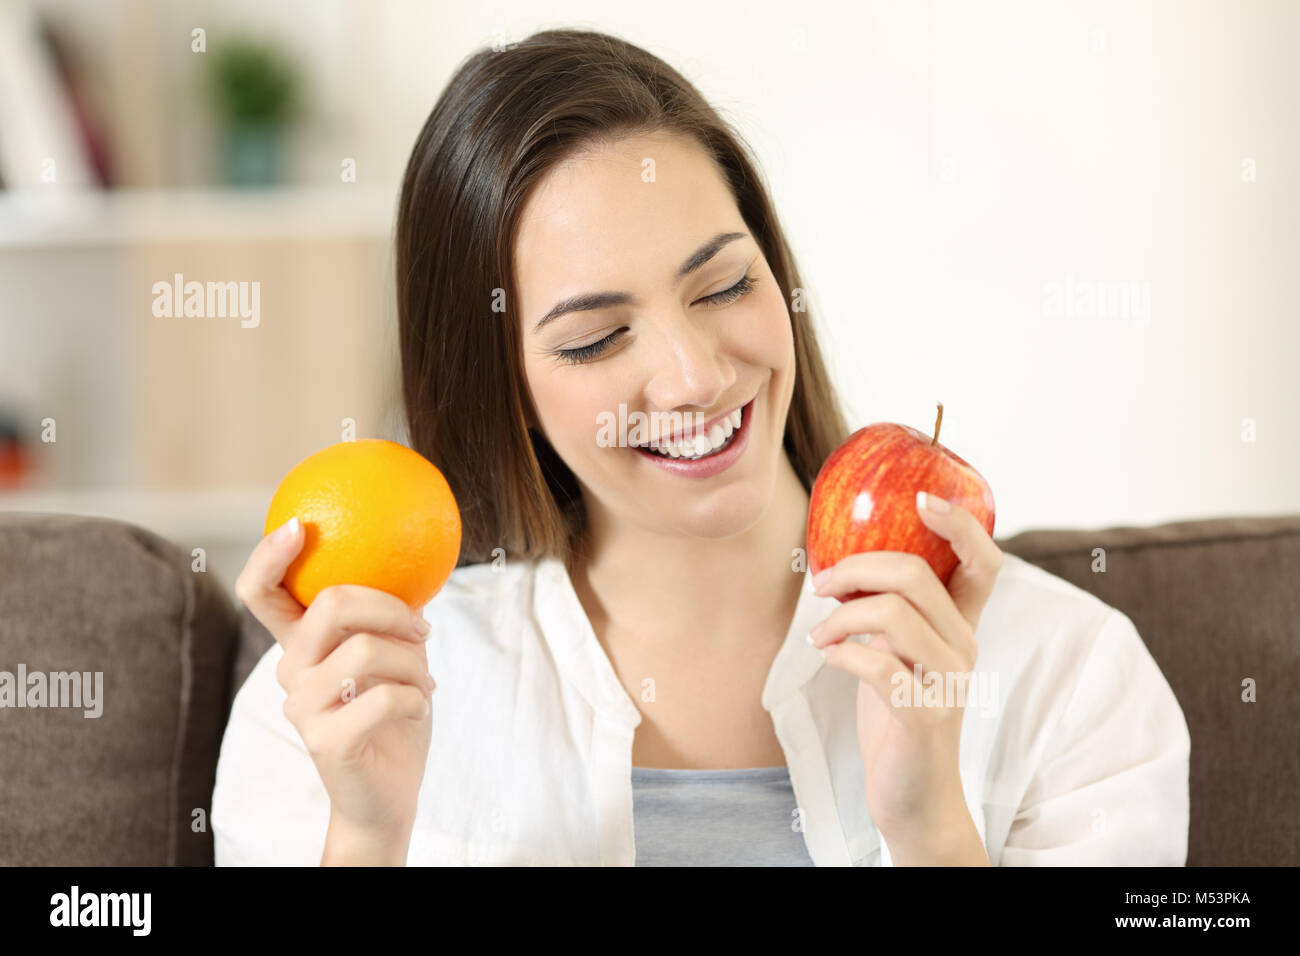 Front view portrait of a happy woman deciding between orange and apple sitting on a couch in the living room at home Stock Photo